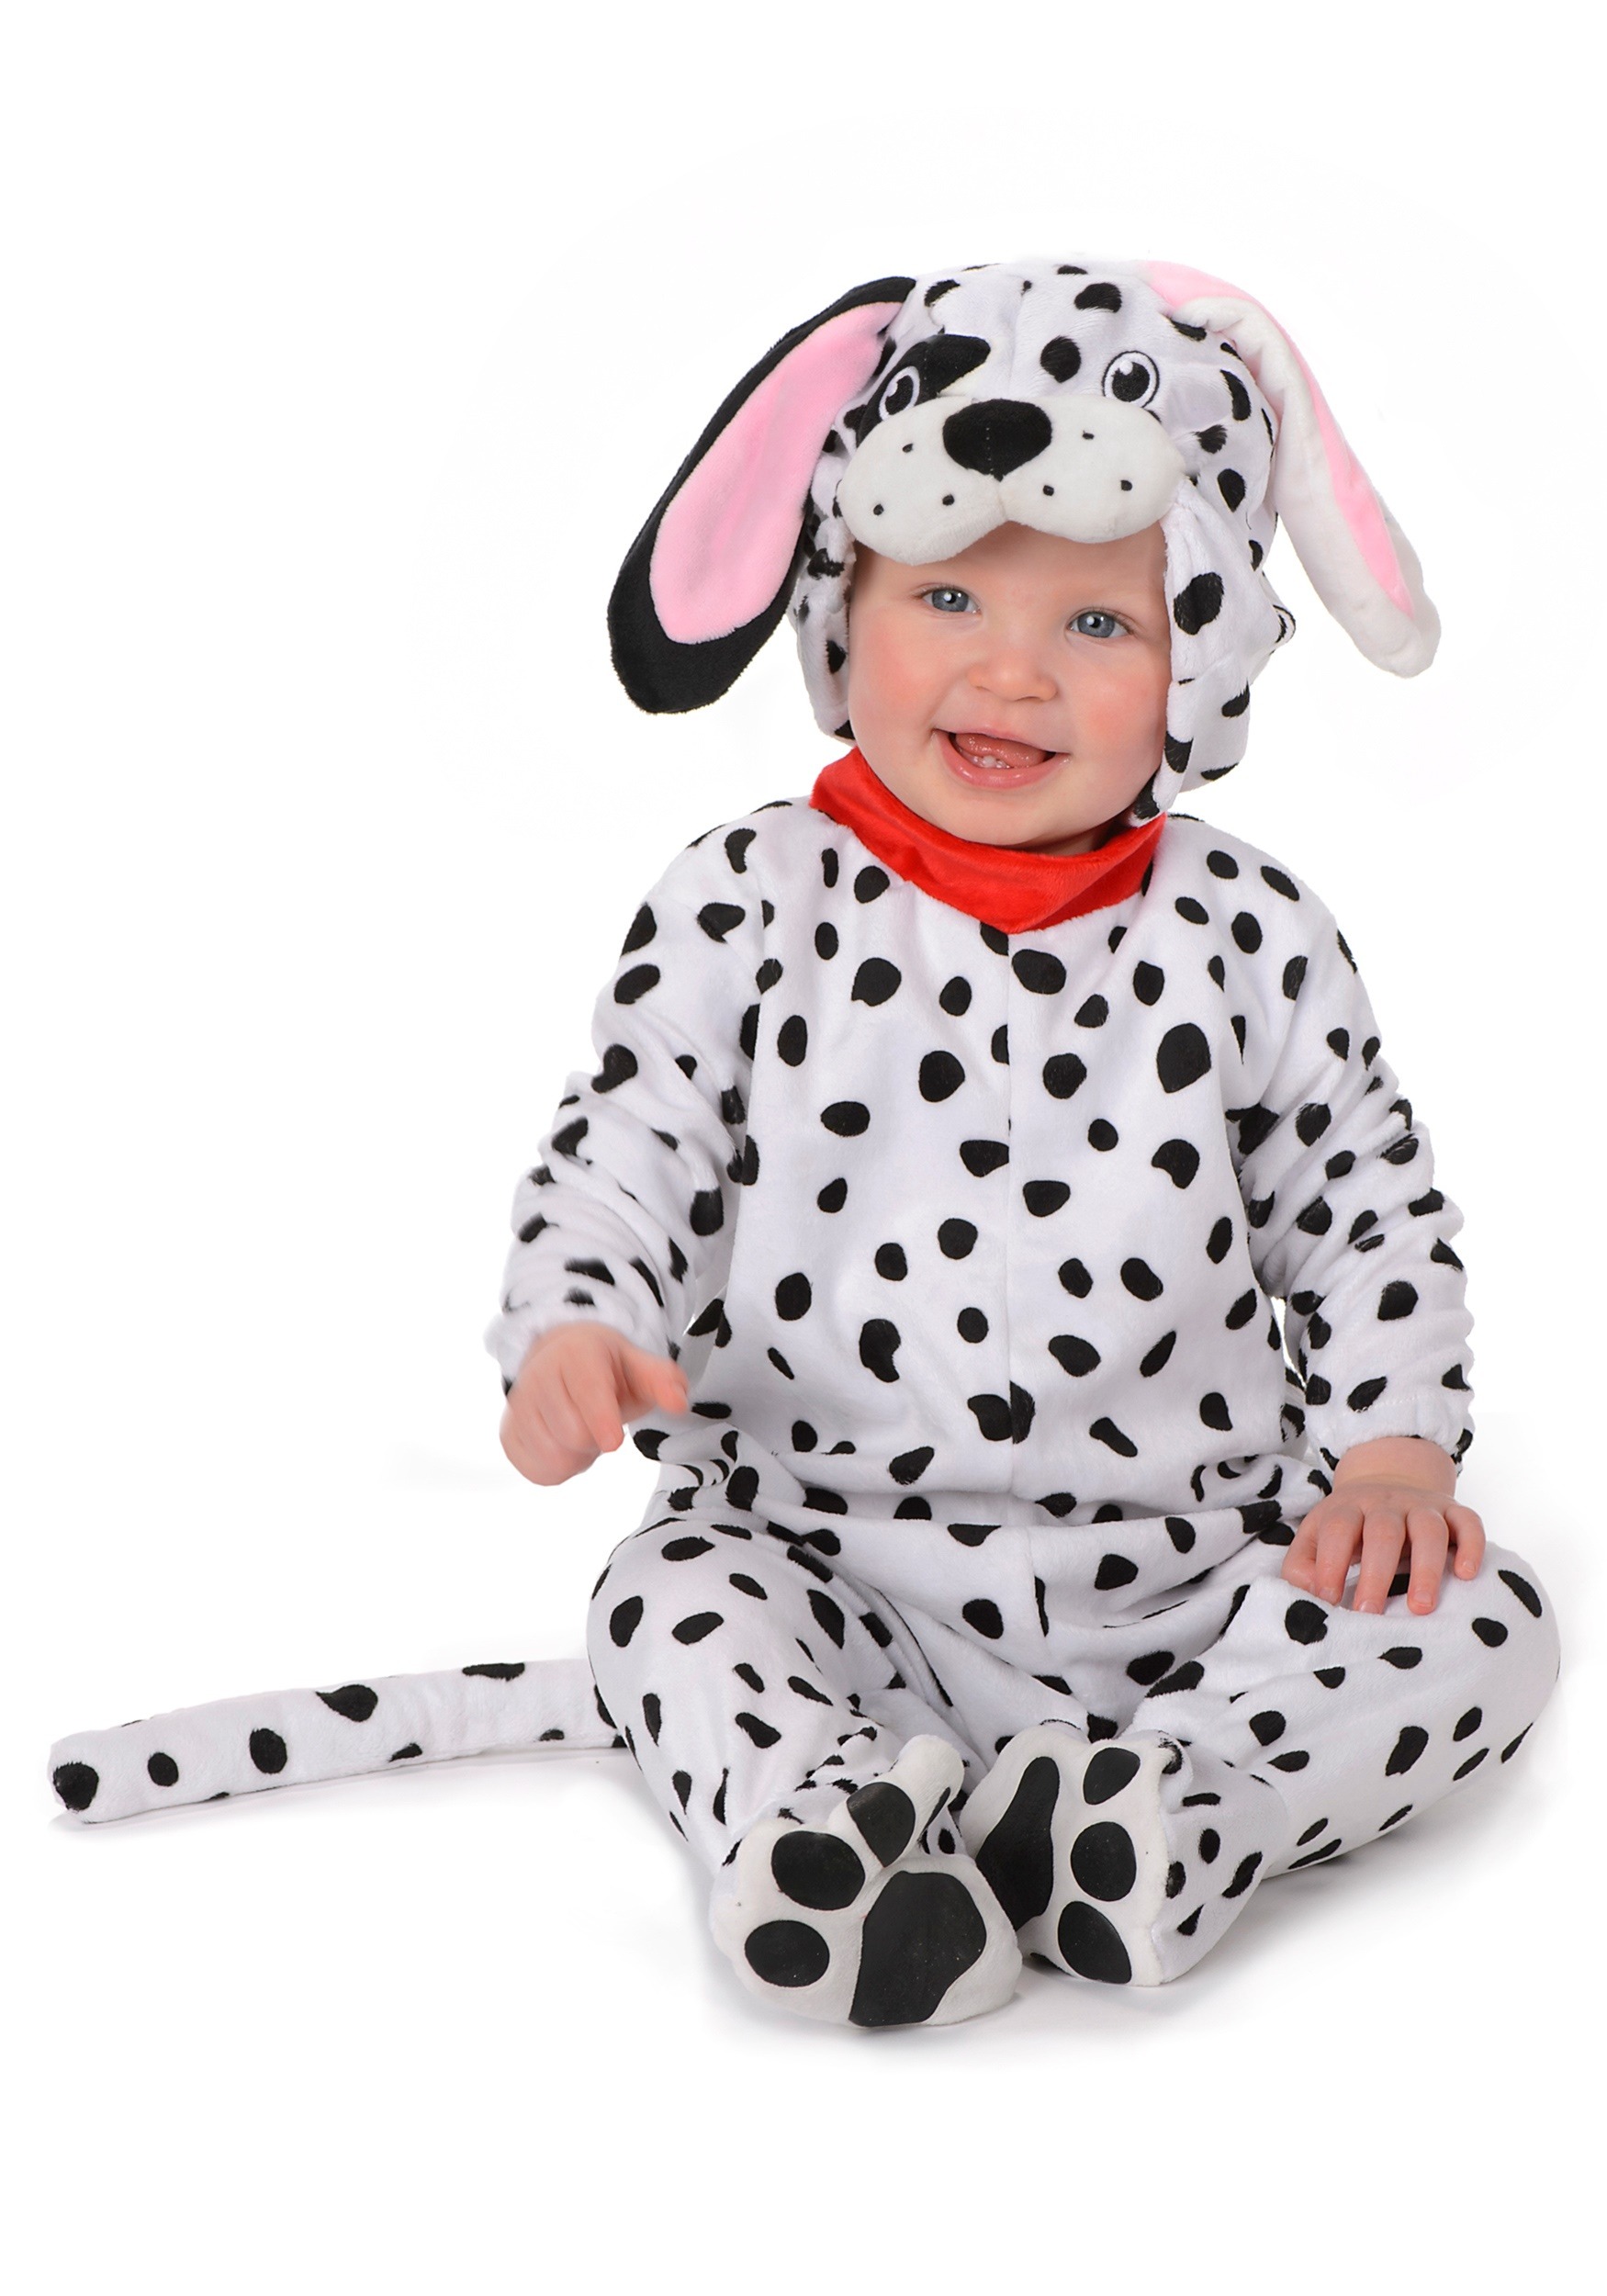 Dalmatian Costume for an Infant